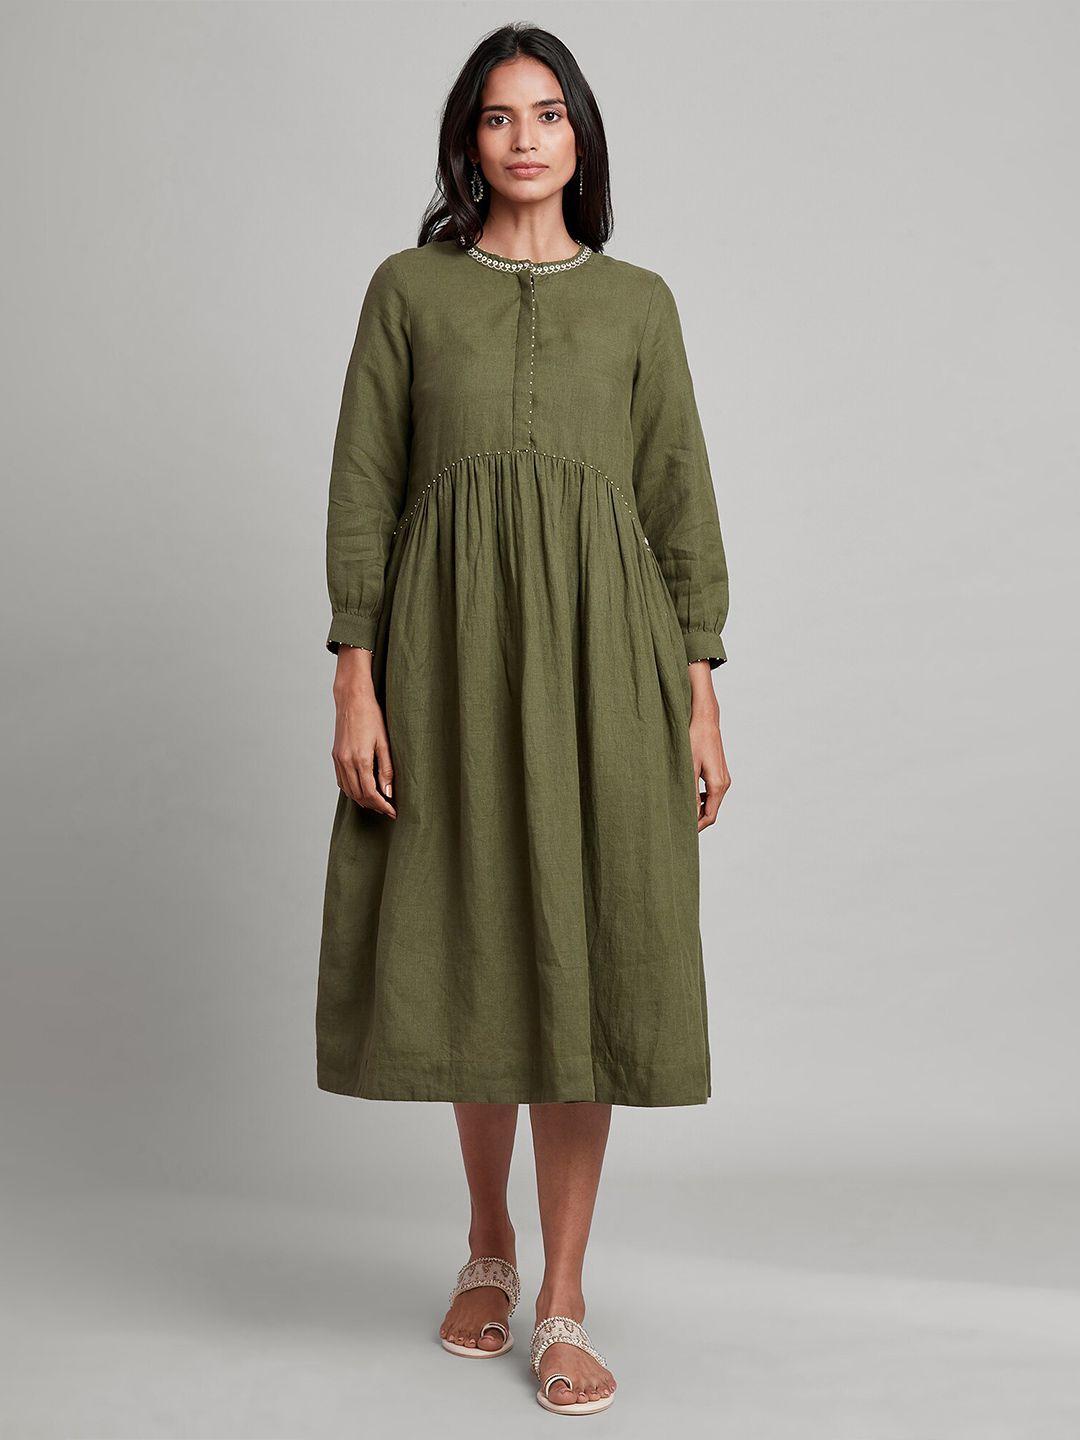 W The Folksong Collection Green Midi Dress